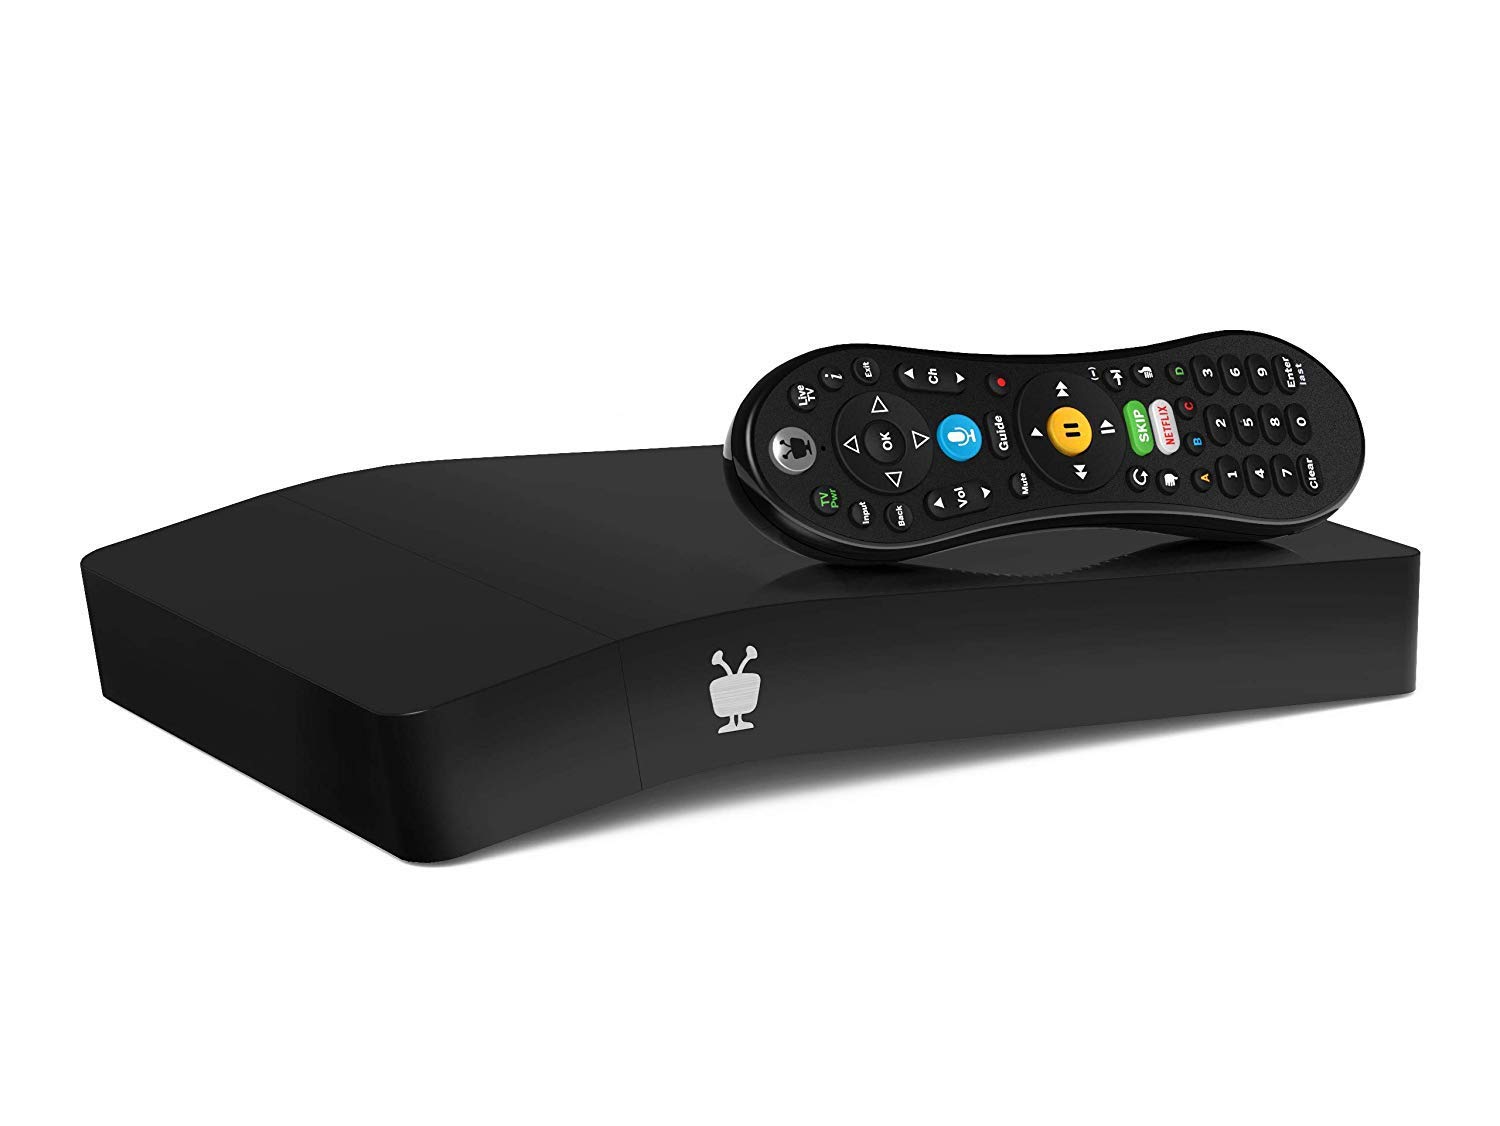 Renewed TiVo Bolt DVRs includes "All-In" lifetime subscription from WeaKnees. $299 4-tuner Bolt, $349 6-tuner Bolt